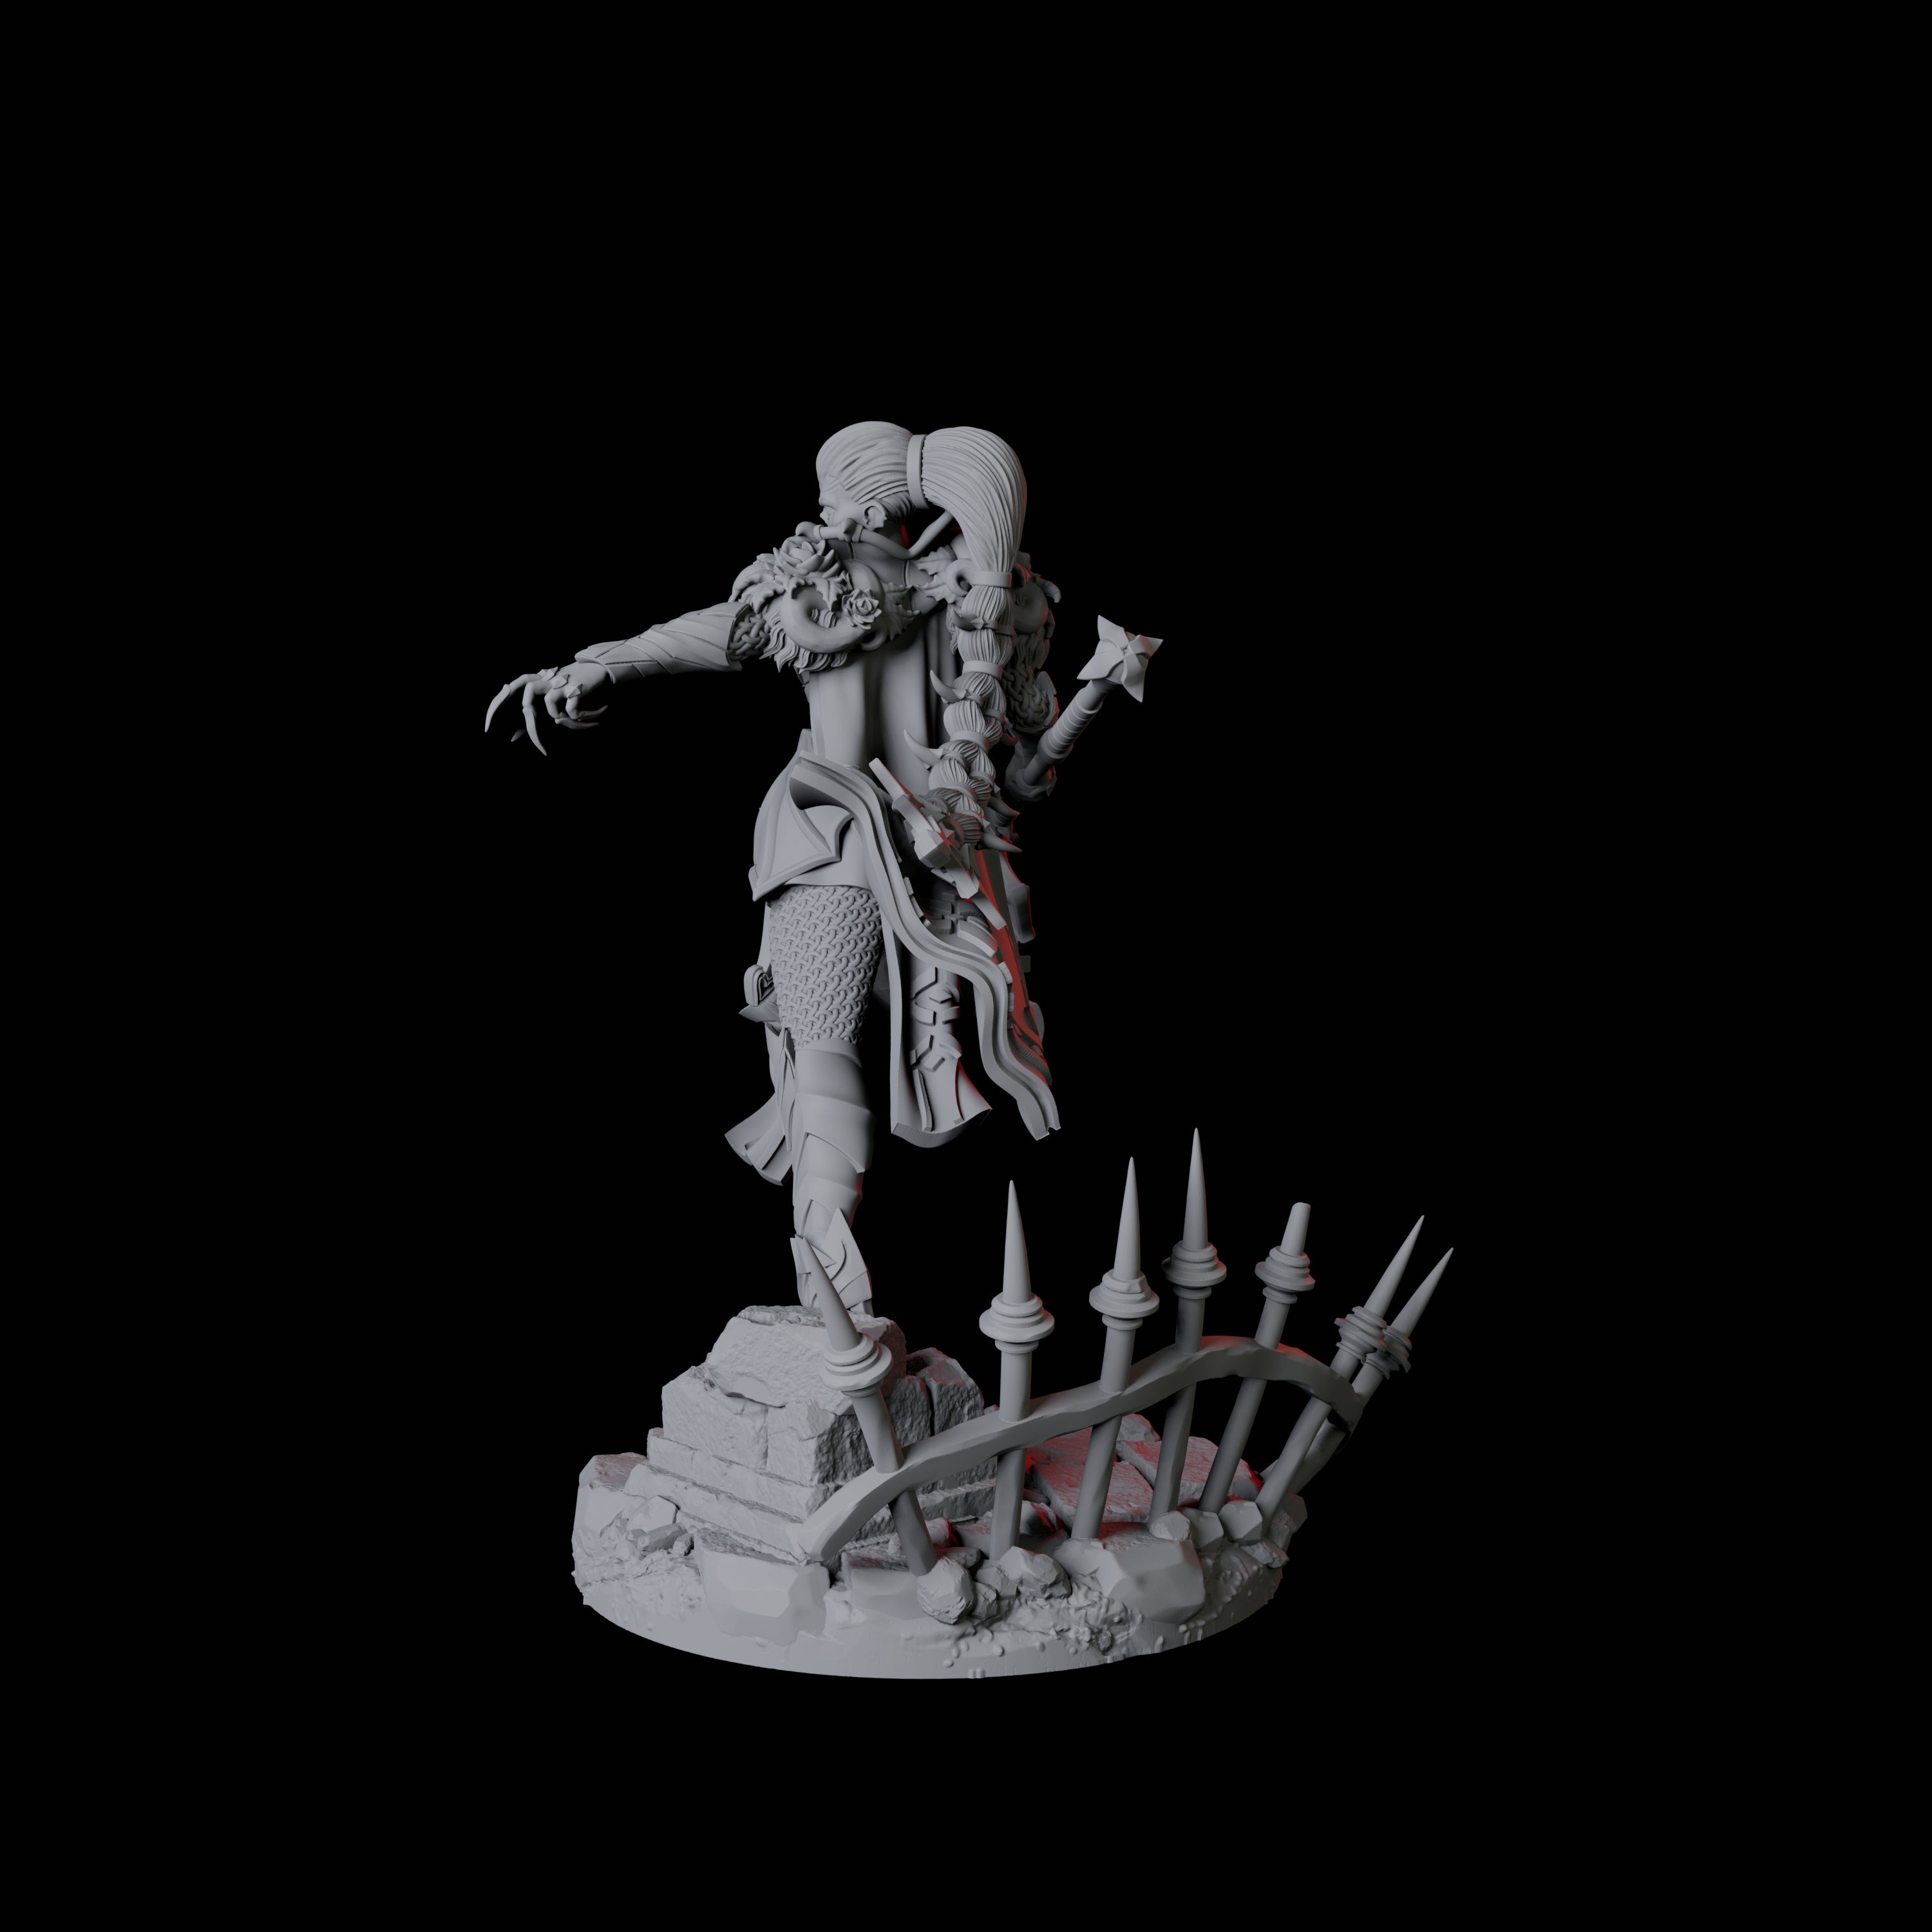 Vampire Warrior B Miniature for Dungeons and Dragons, Pathfinder or other TTRPGs